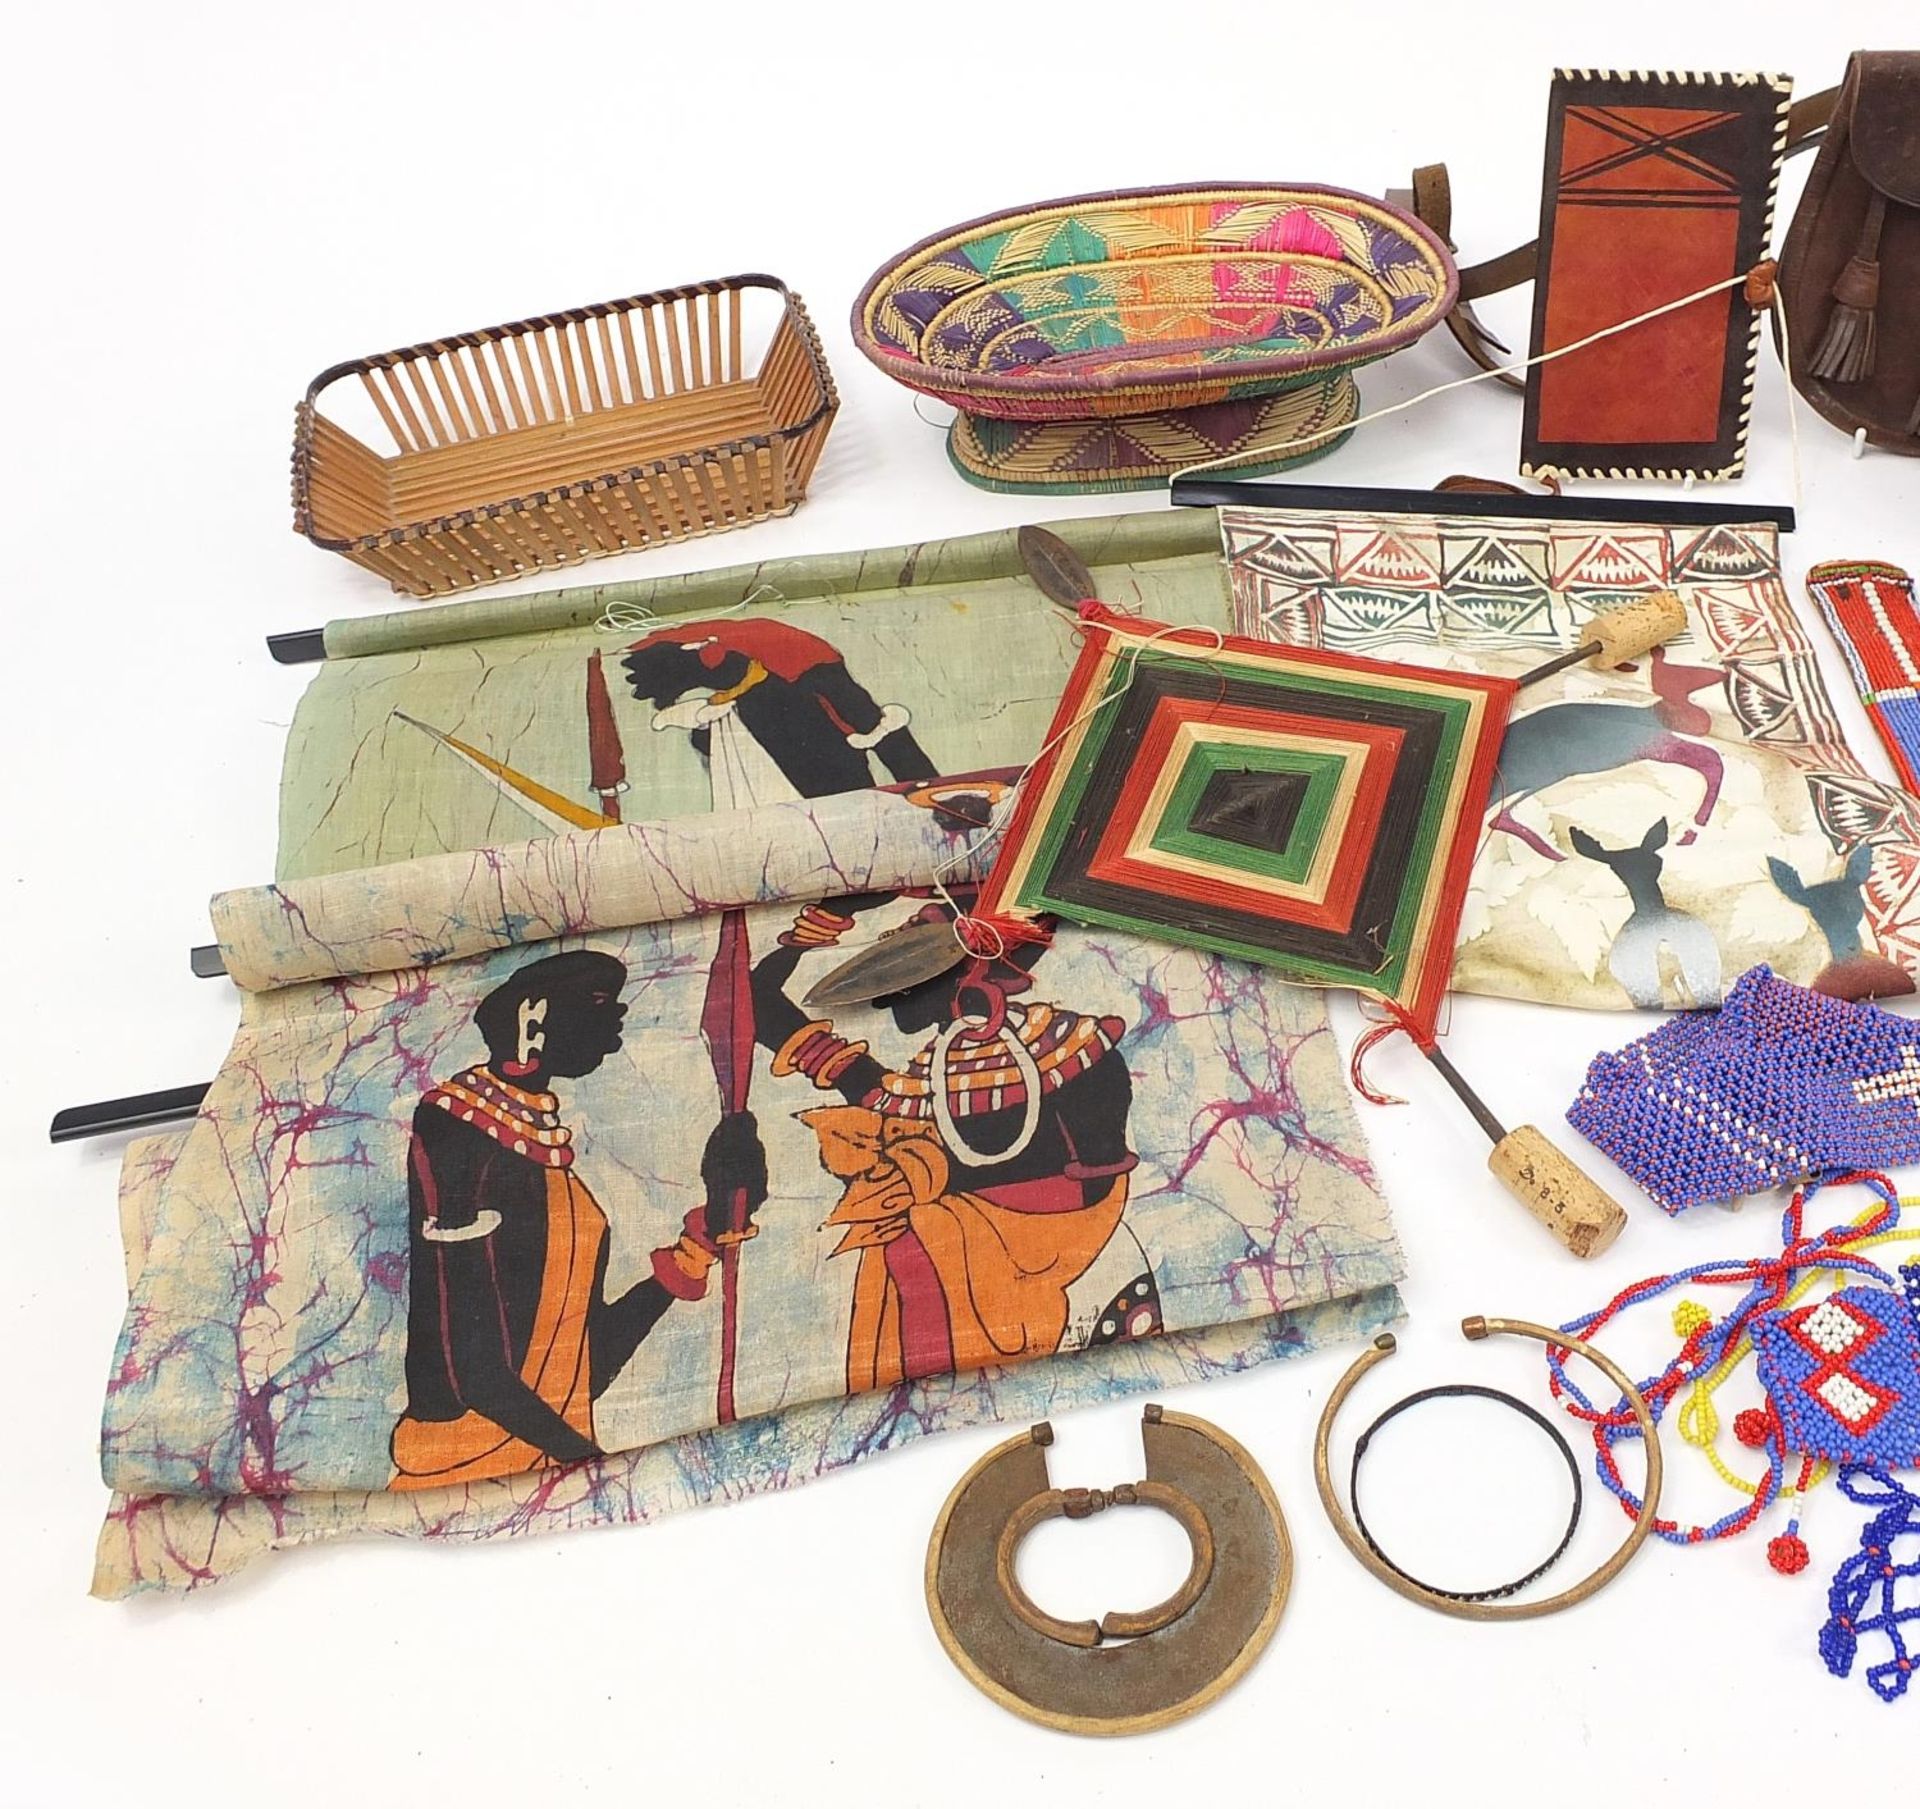 Tribal interest items including a carved wood headrest, gourd vessel with beadwork, tie-dye panels - Image 2 of 5